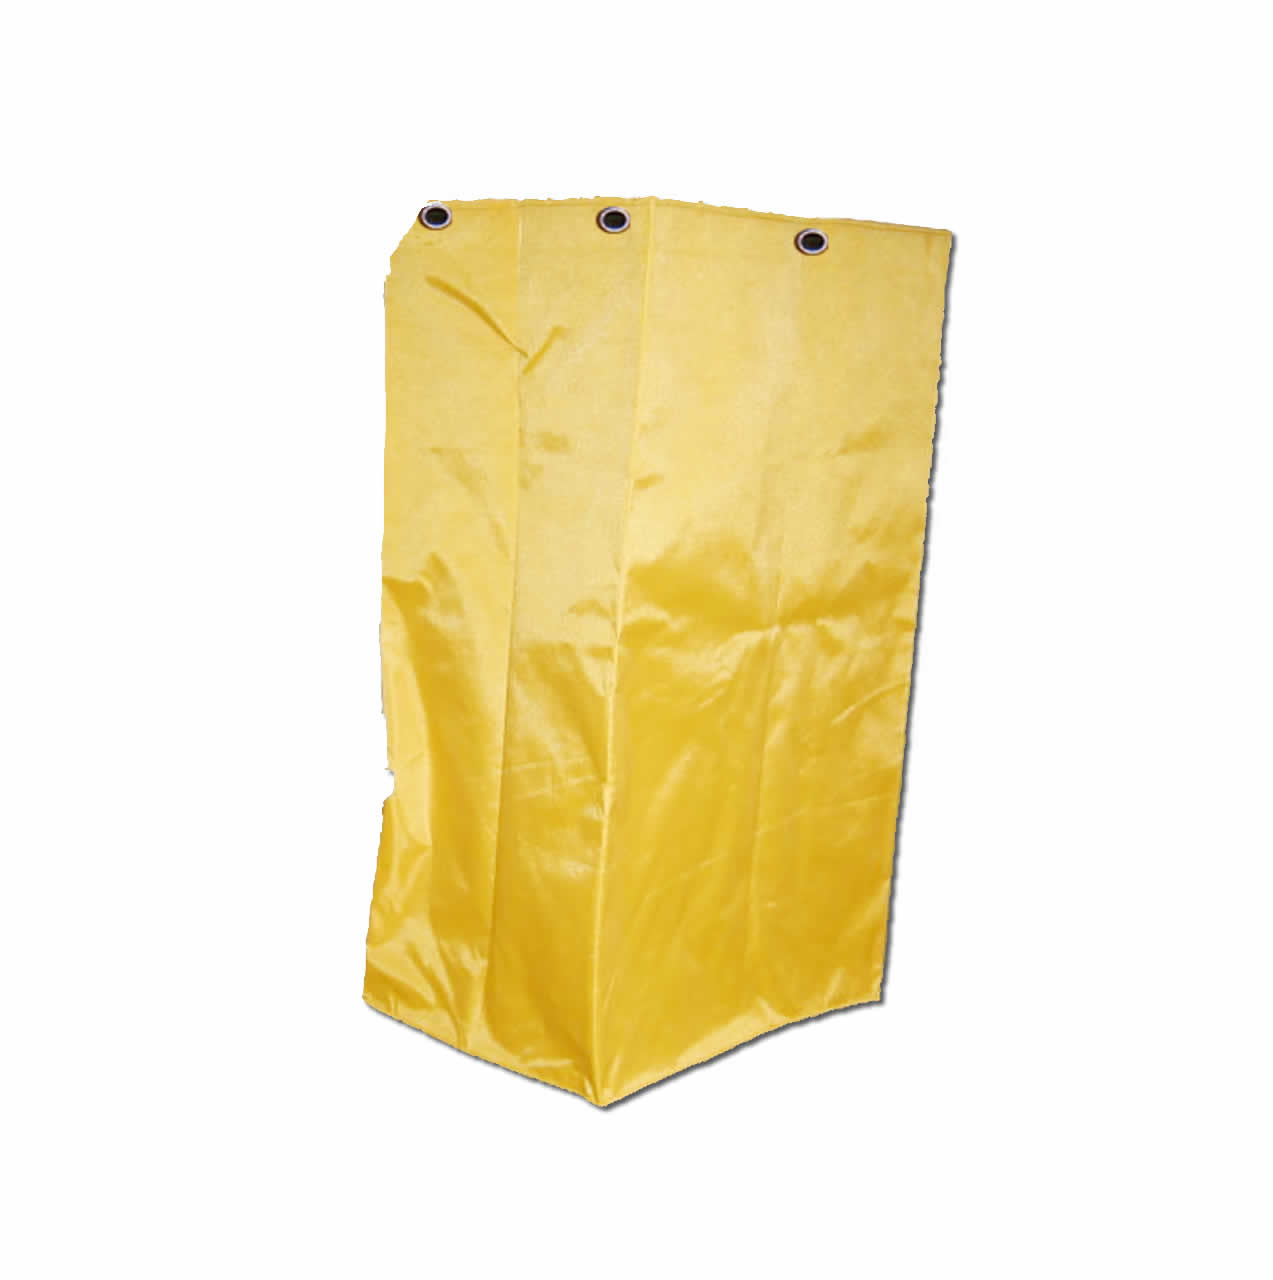 Janitor's Cart With 25 Gallon Yellow Bag